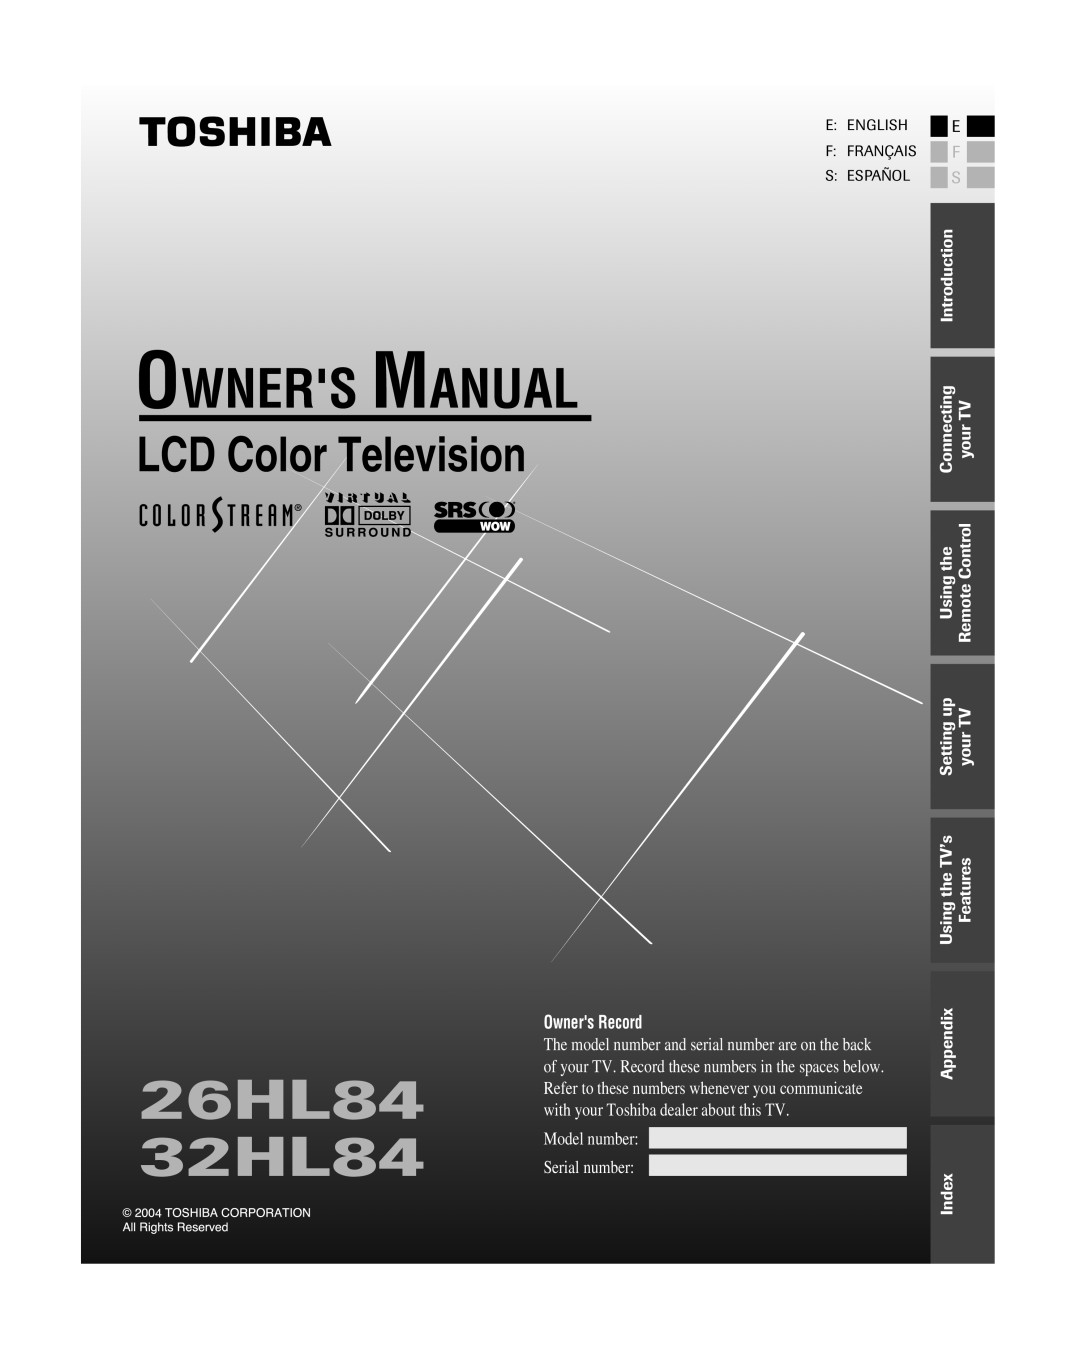 Toshiba owner manual 26HL84 32HL84, Owners Manual, LCD Color Television, Owners Record, Model number Serial number 